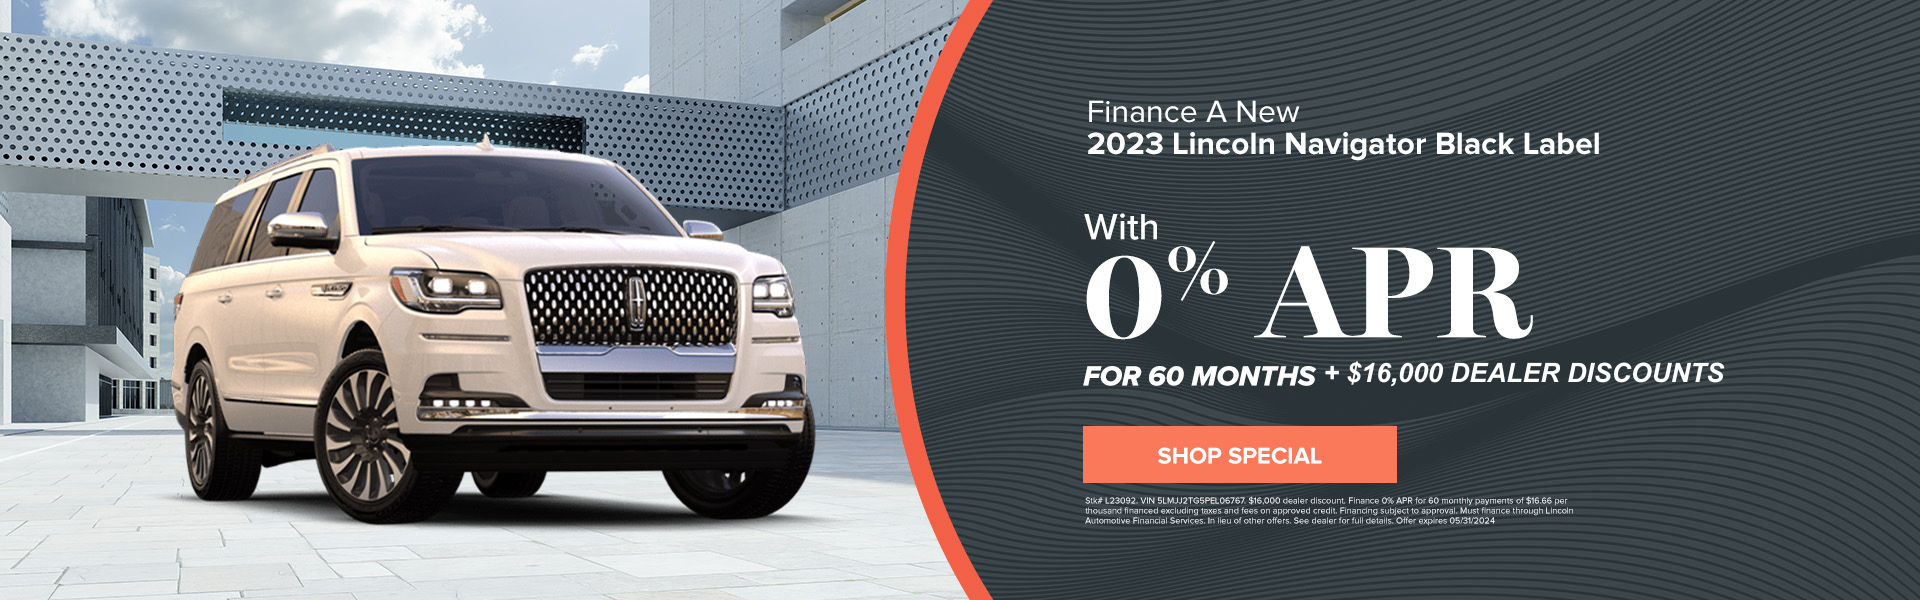 Finance A New 2023 Lincoln NavigatorWith 0% APR For 60 Mon